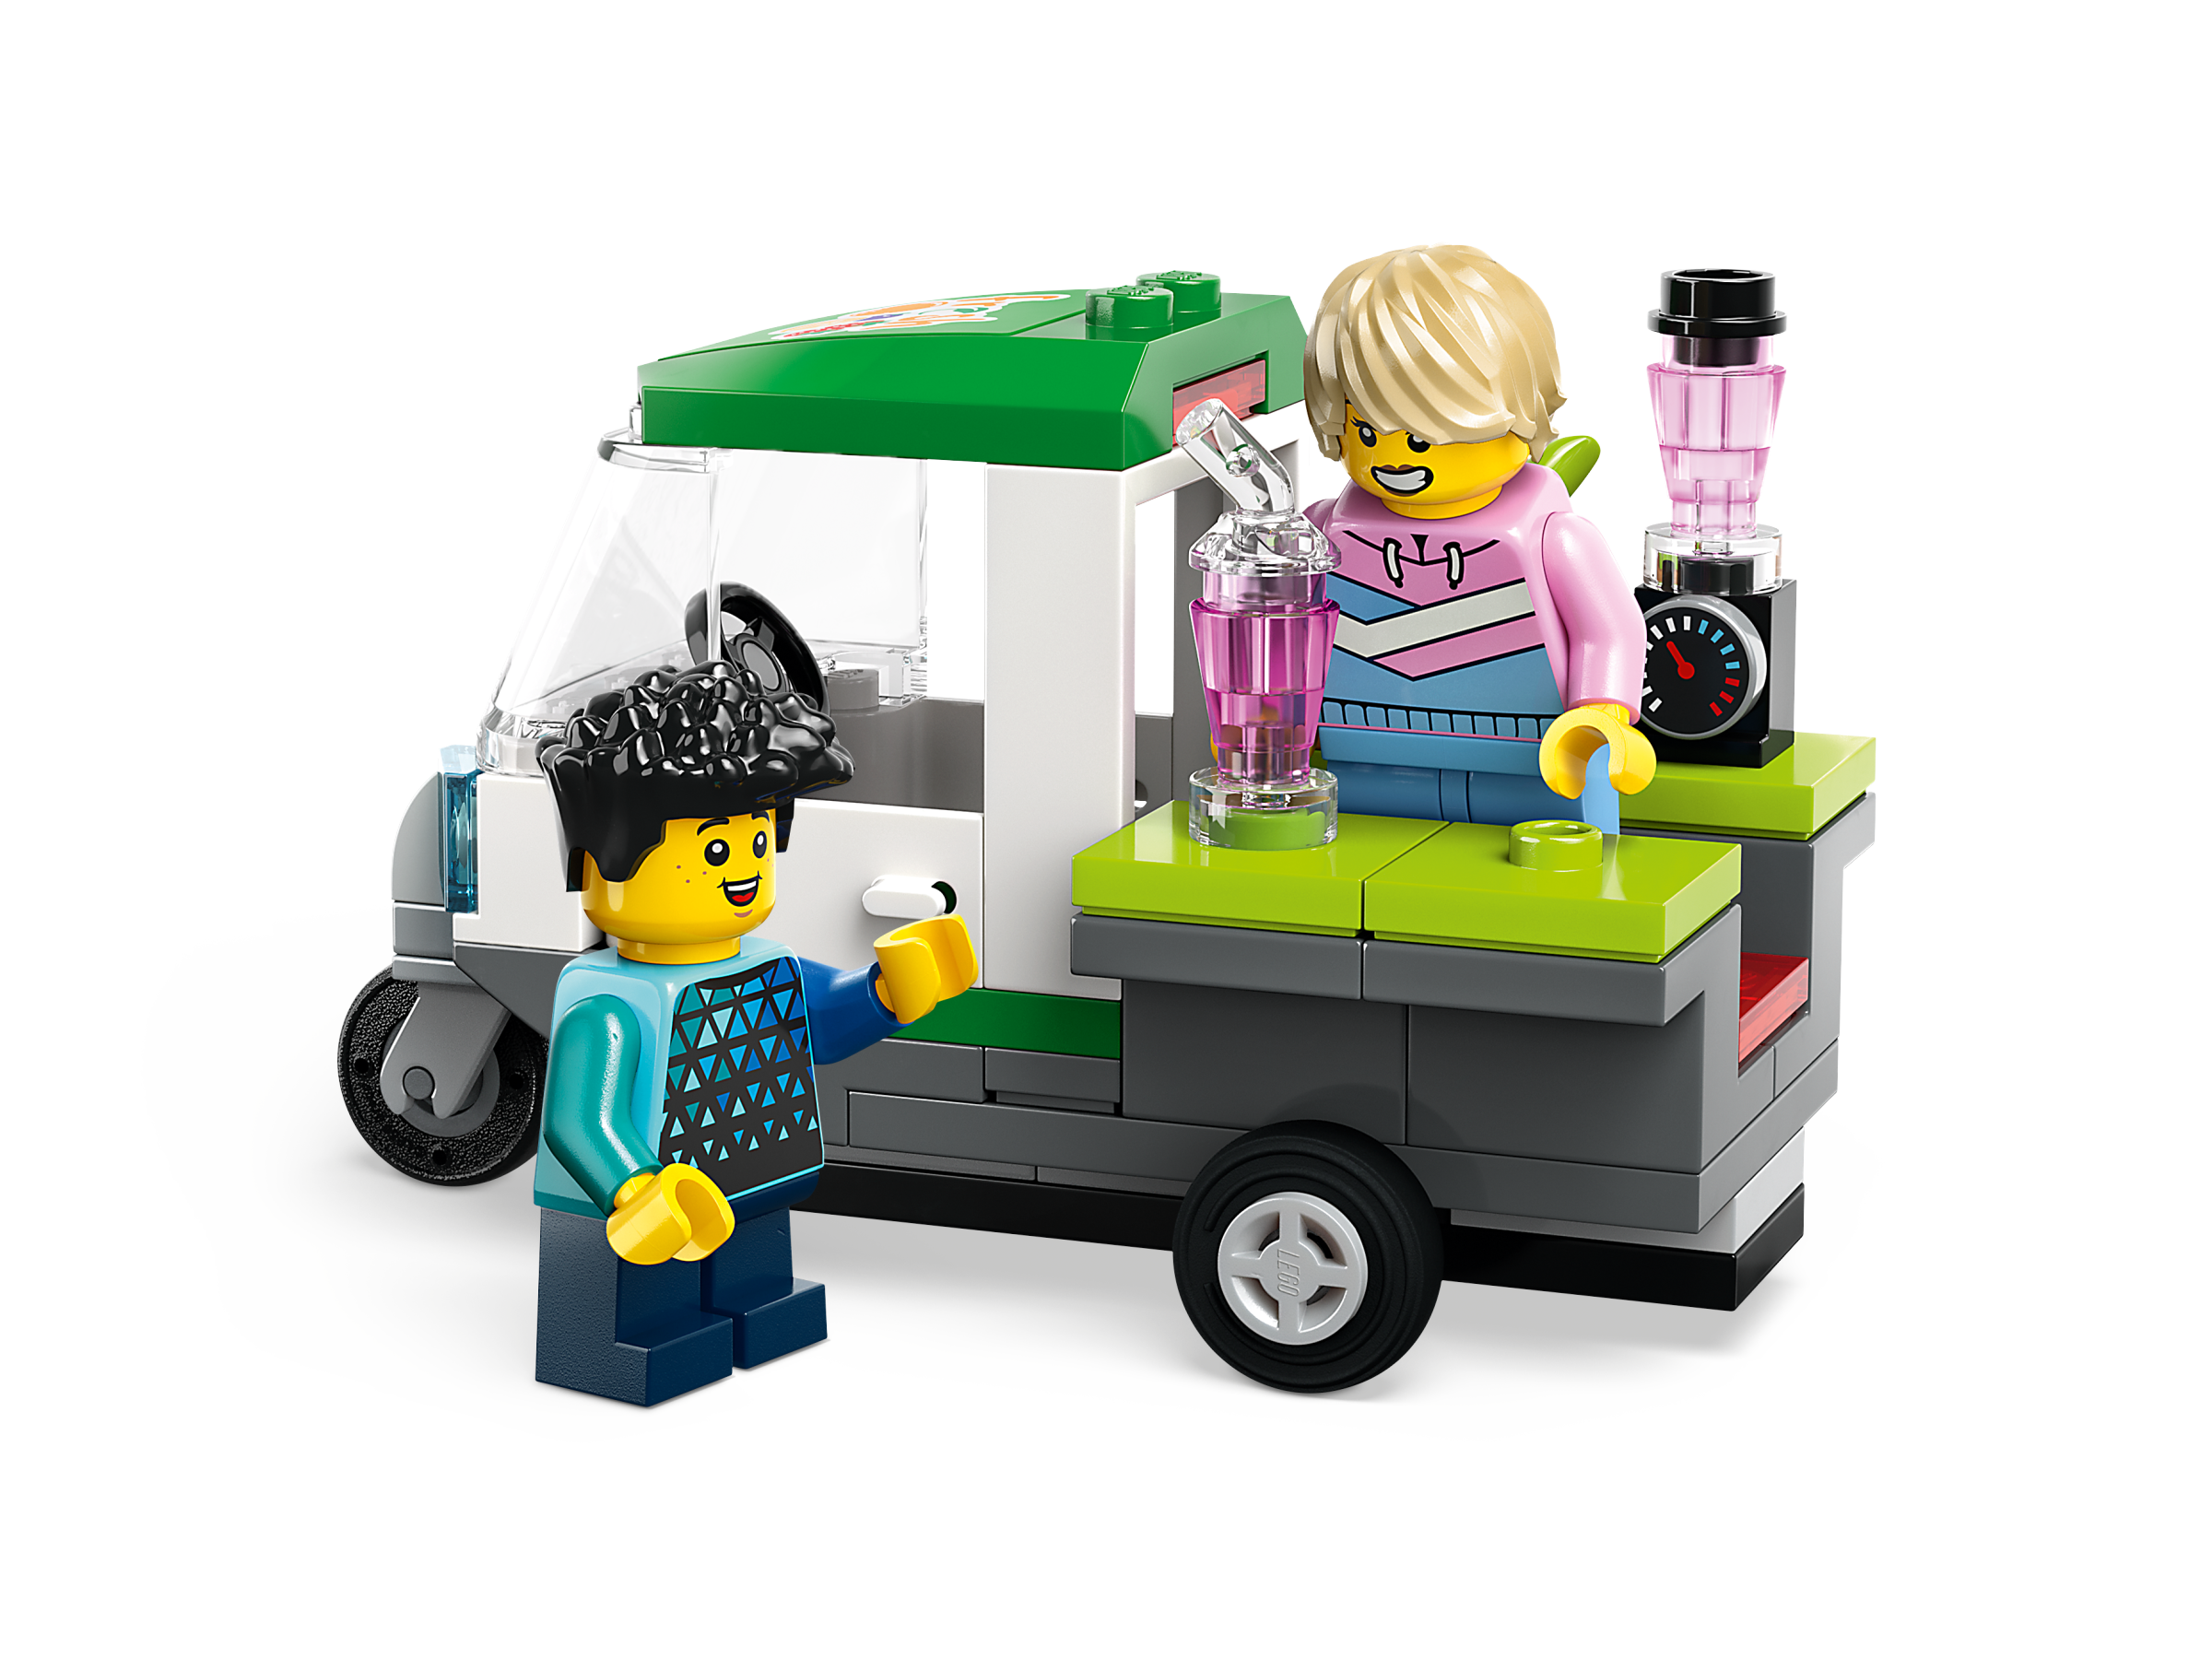 Downtown 60380 | City | Buy online at the Official LEGO® Shop US